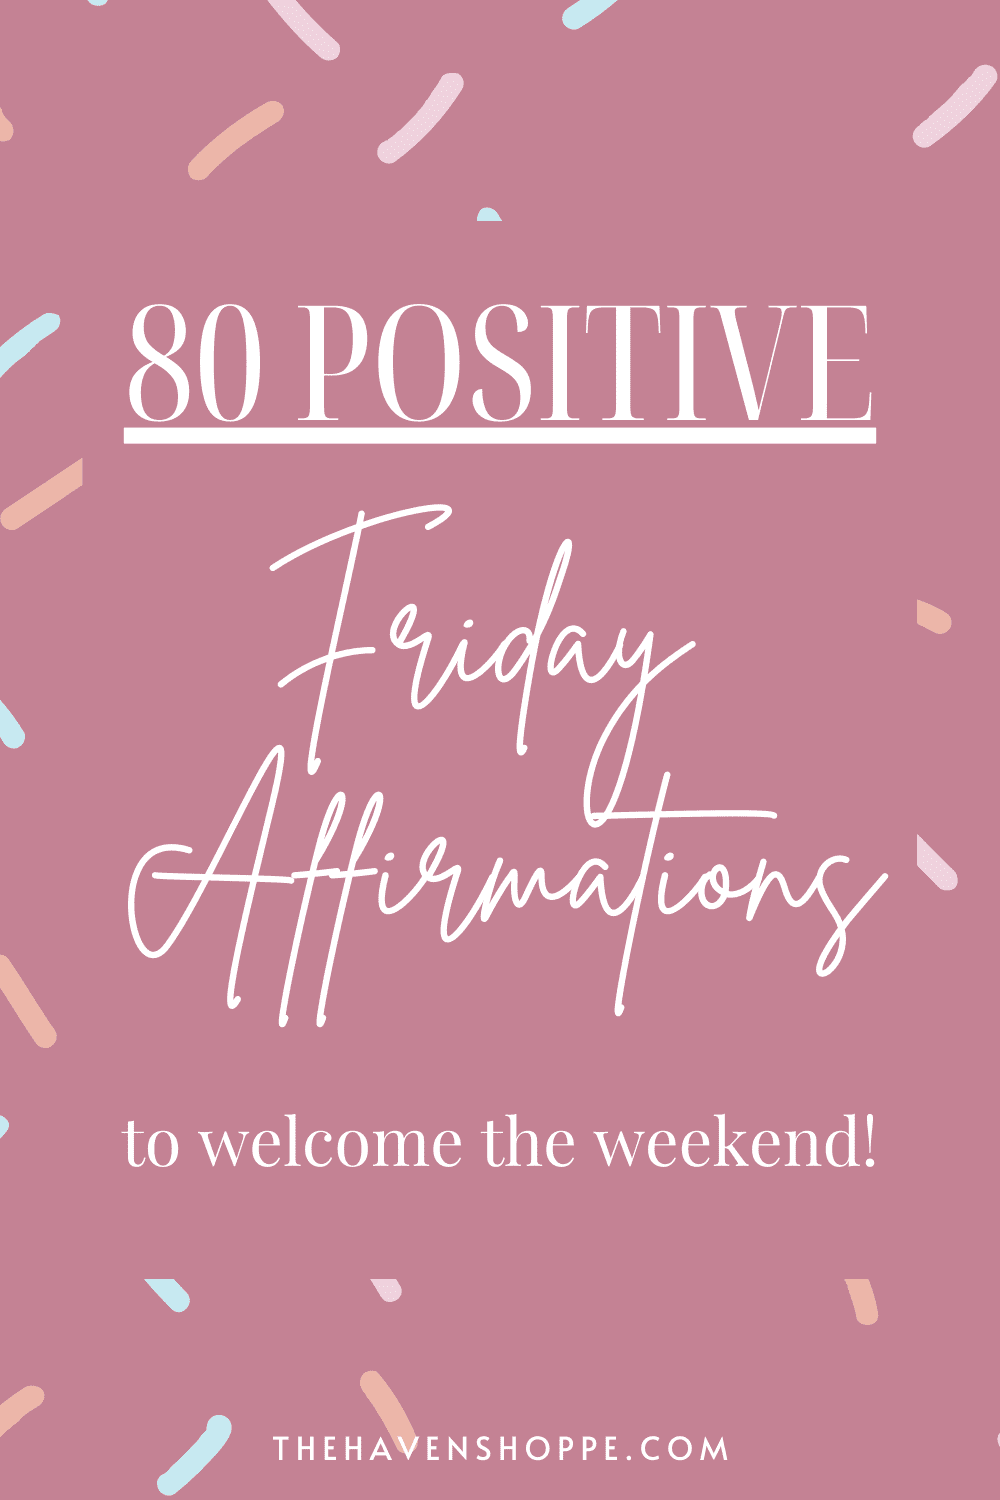 80 Positive Friday Affirmations to Welcome Your Weekend 🥂